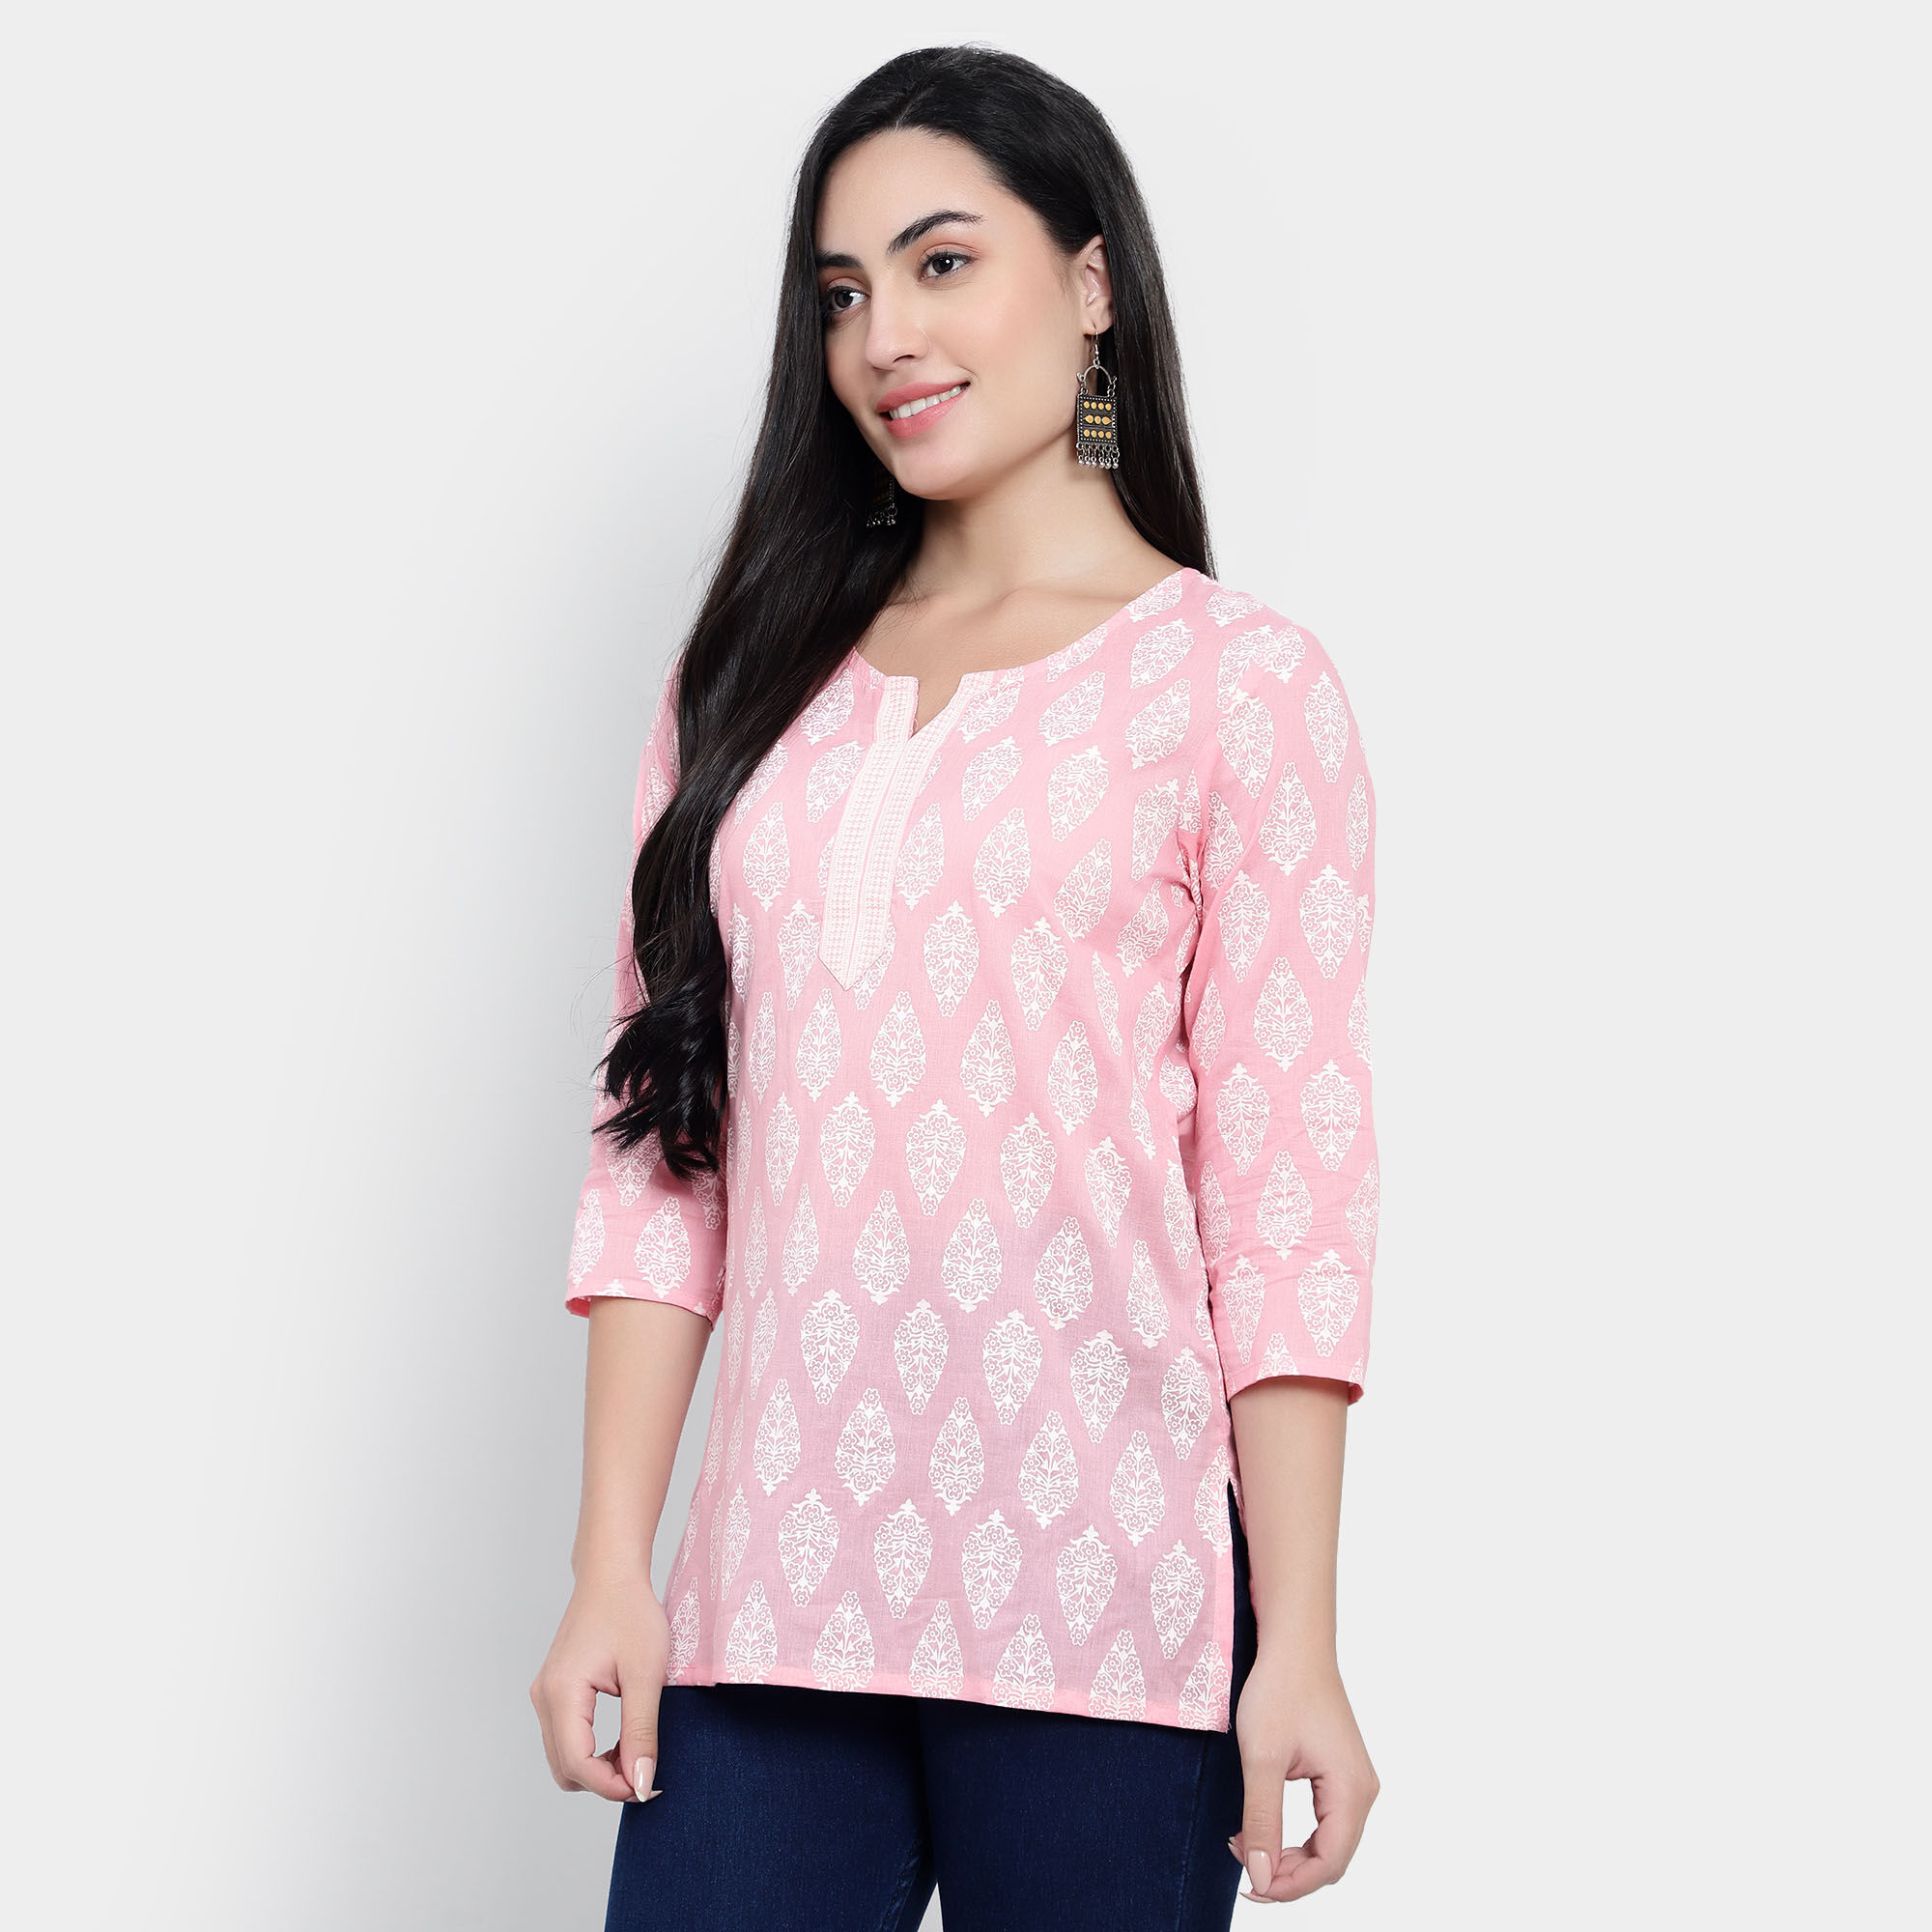 PINK ALMIRAH by Vishal Mega Mart Black Viscose A-line Kurti Price in India  - Buy PINK ALMIRAH by Vishal Mega Mart Black Viscose A-line Kurti Online at  Snapdeal